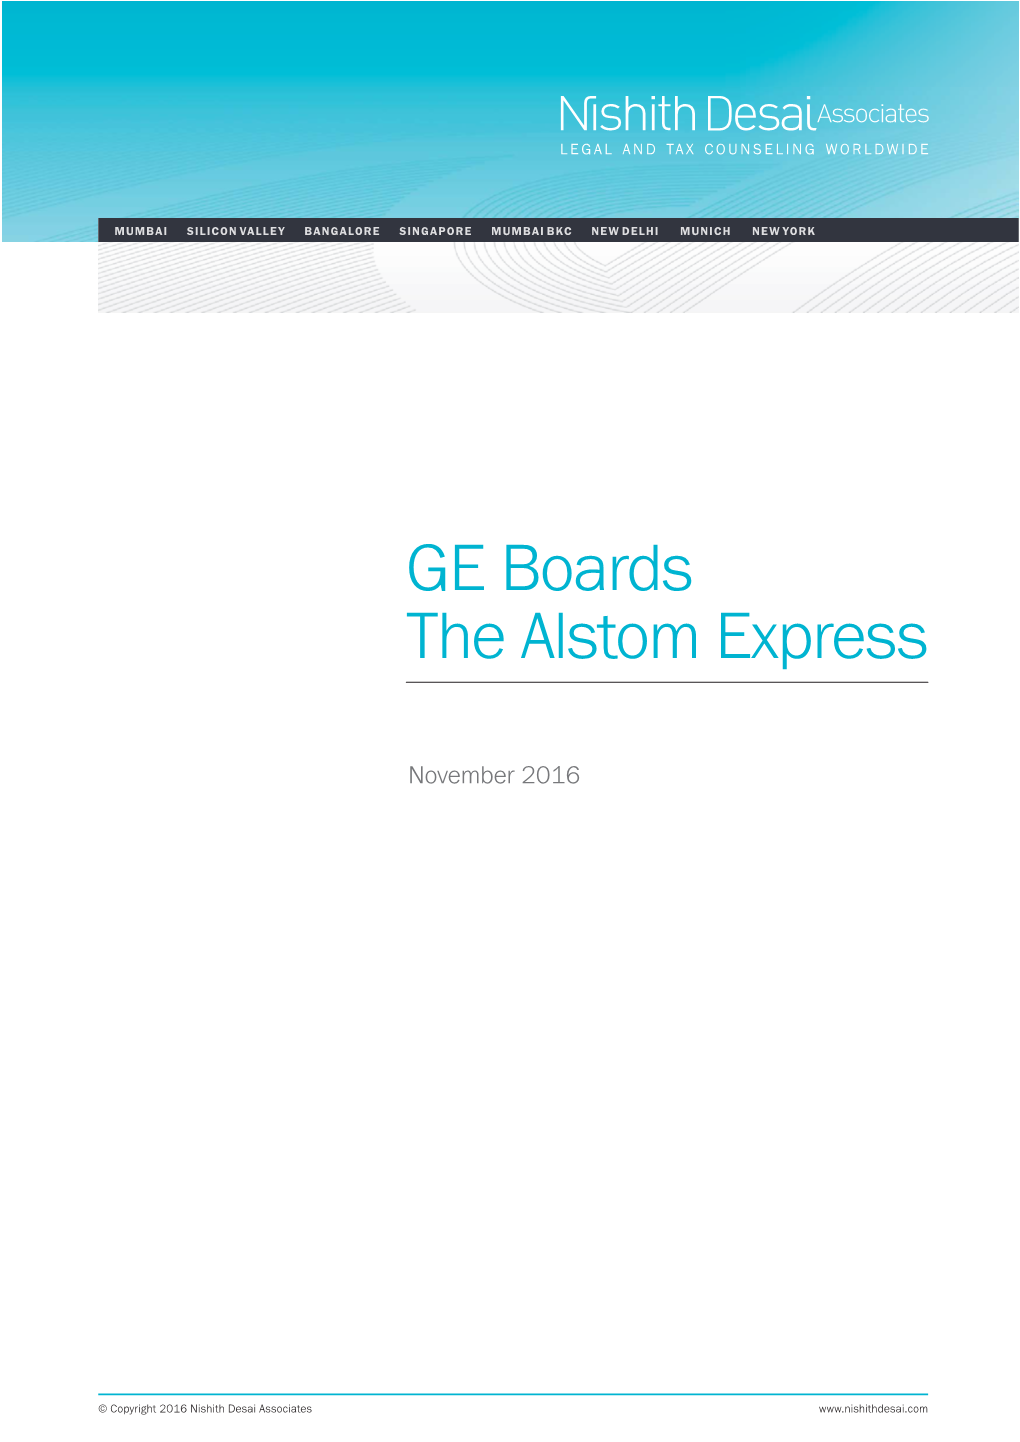 GE Boards the Alstom Express